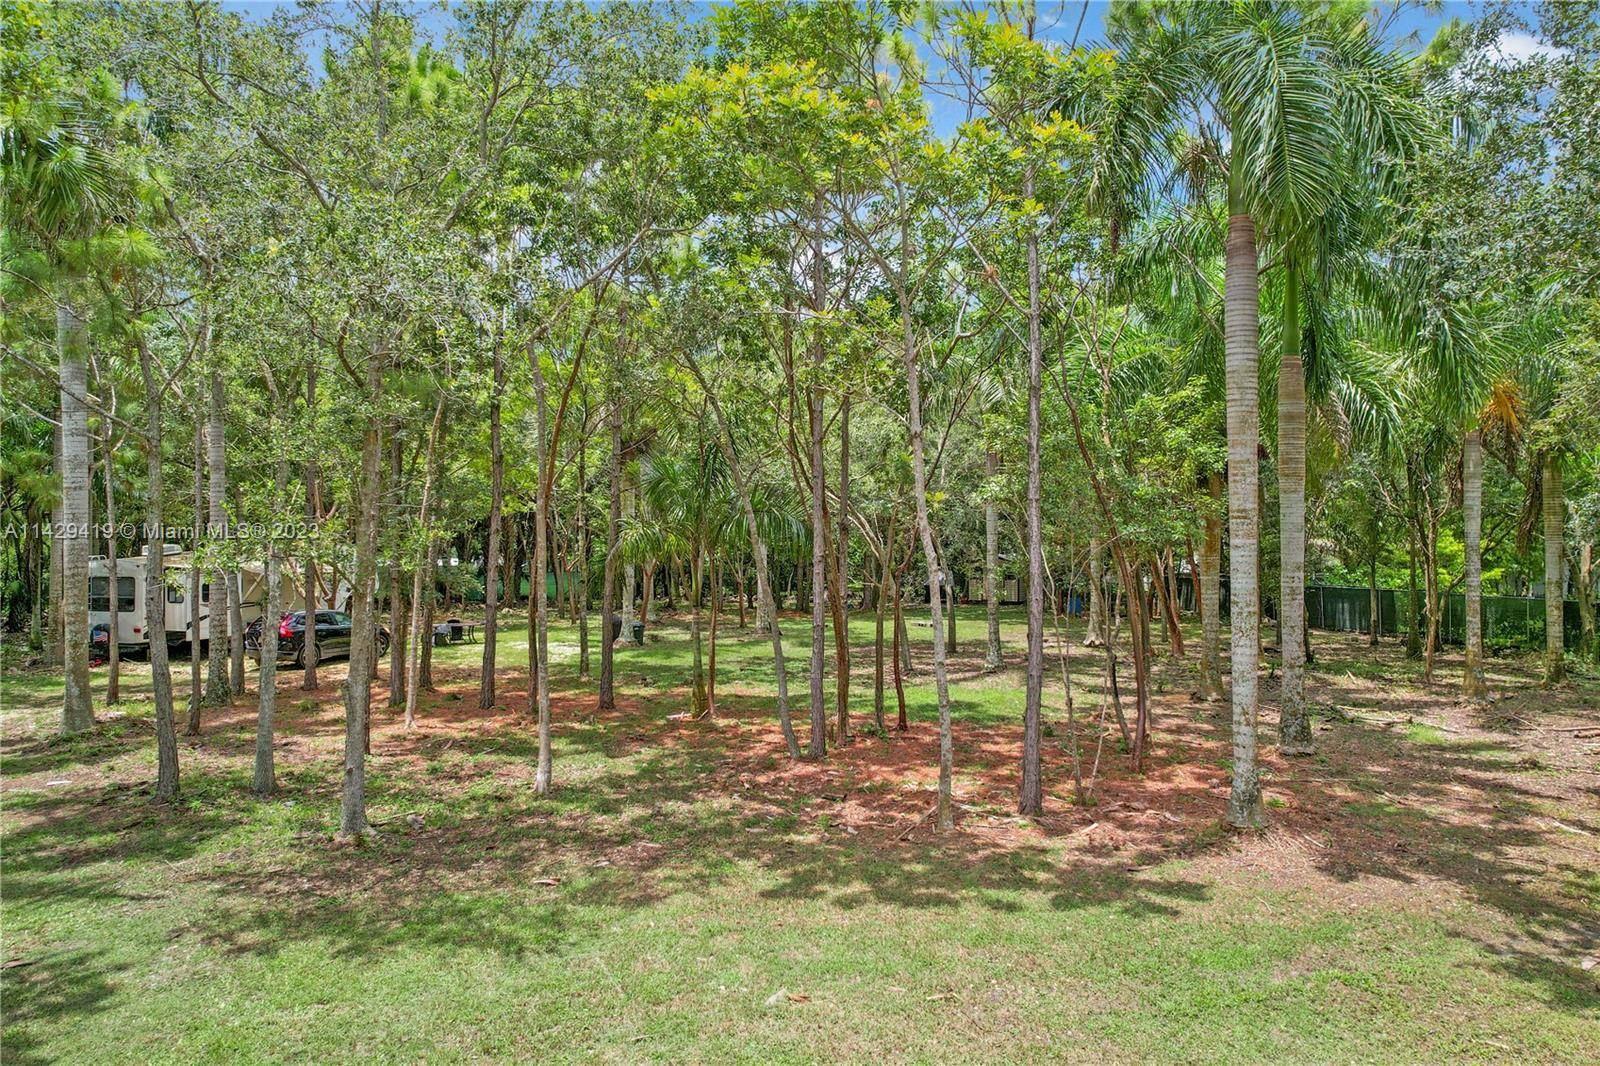 PRISTINE BUILDERS ACRE.. LOADED W MAHOGANY'S AND PALMS PLUS.